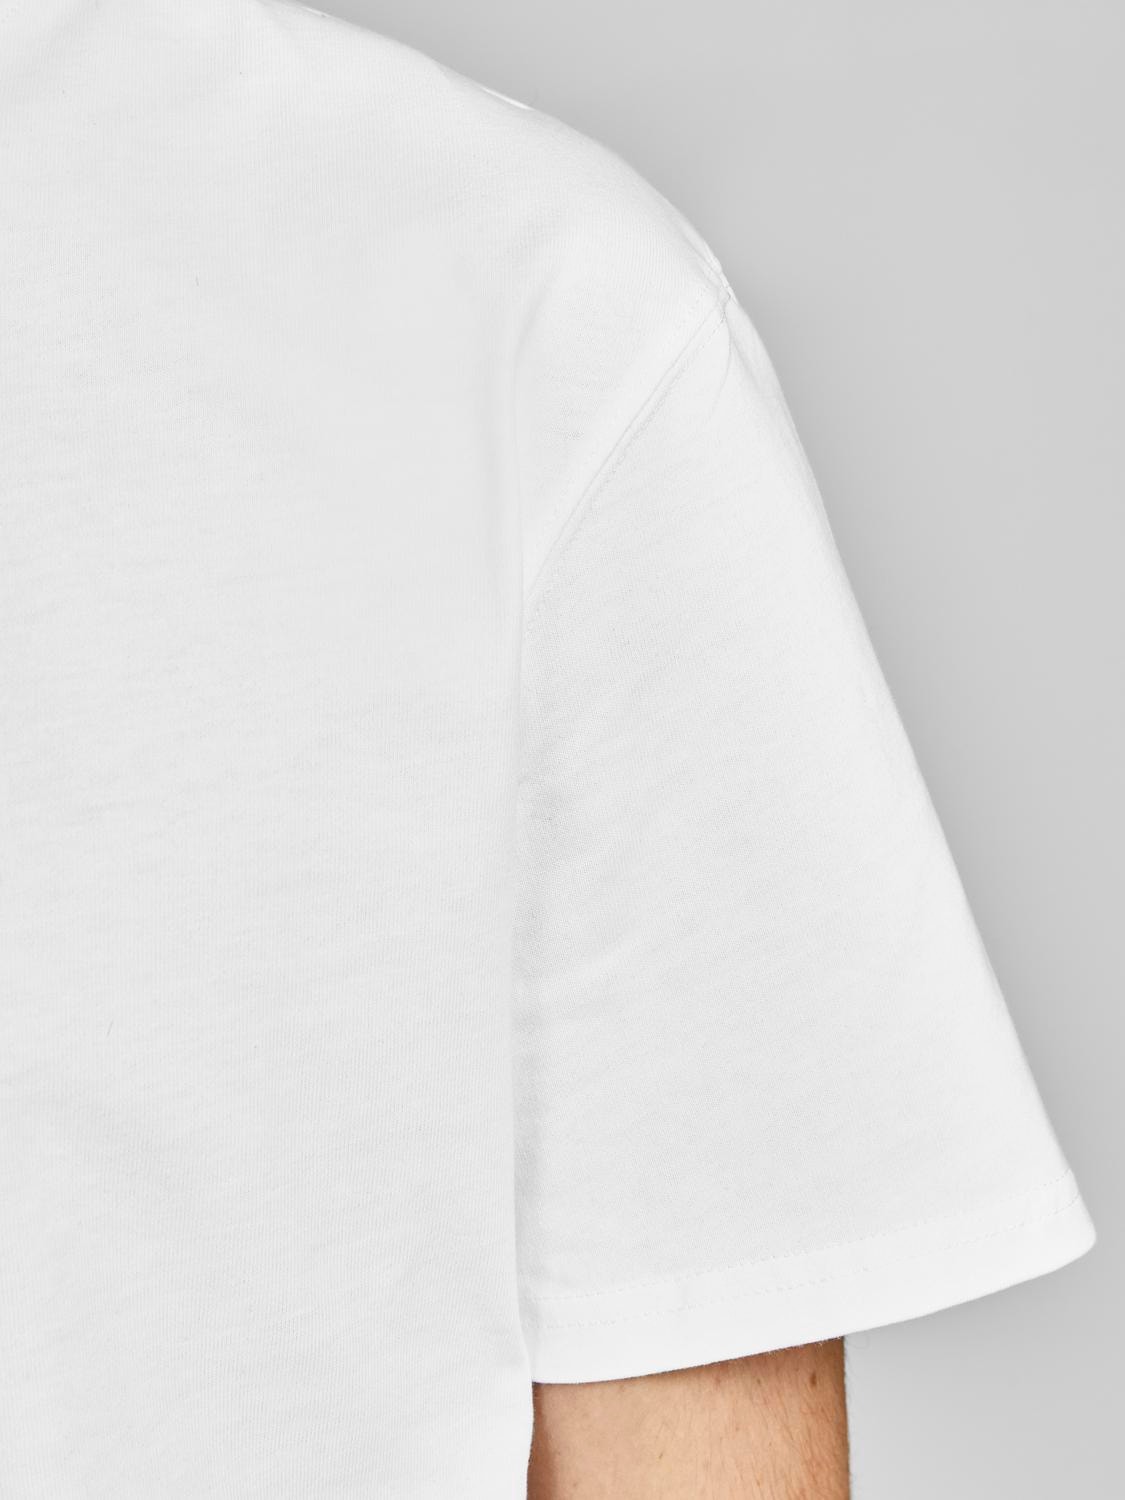 Jack & Jones Relaxed Fit O-Neck T-Shirt -White - 12190467